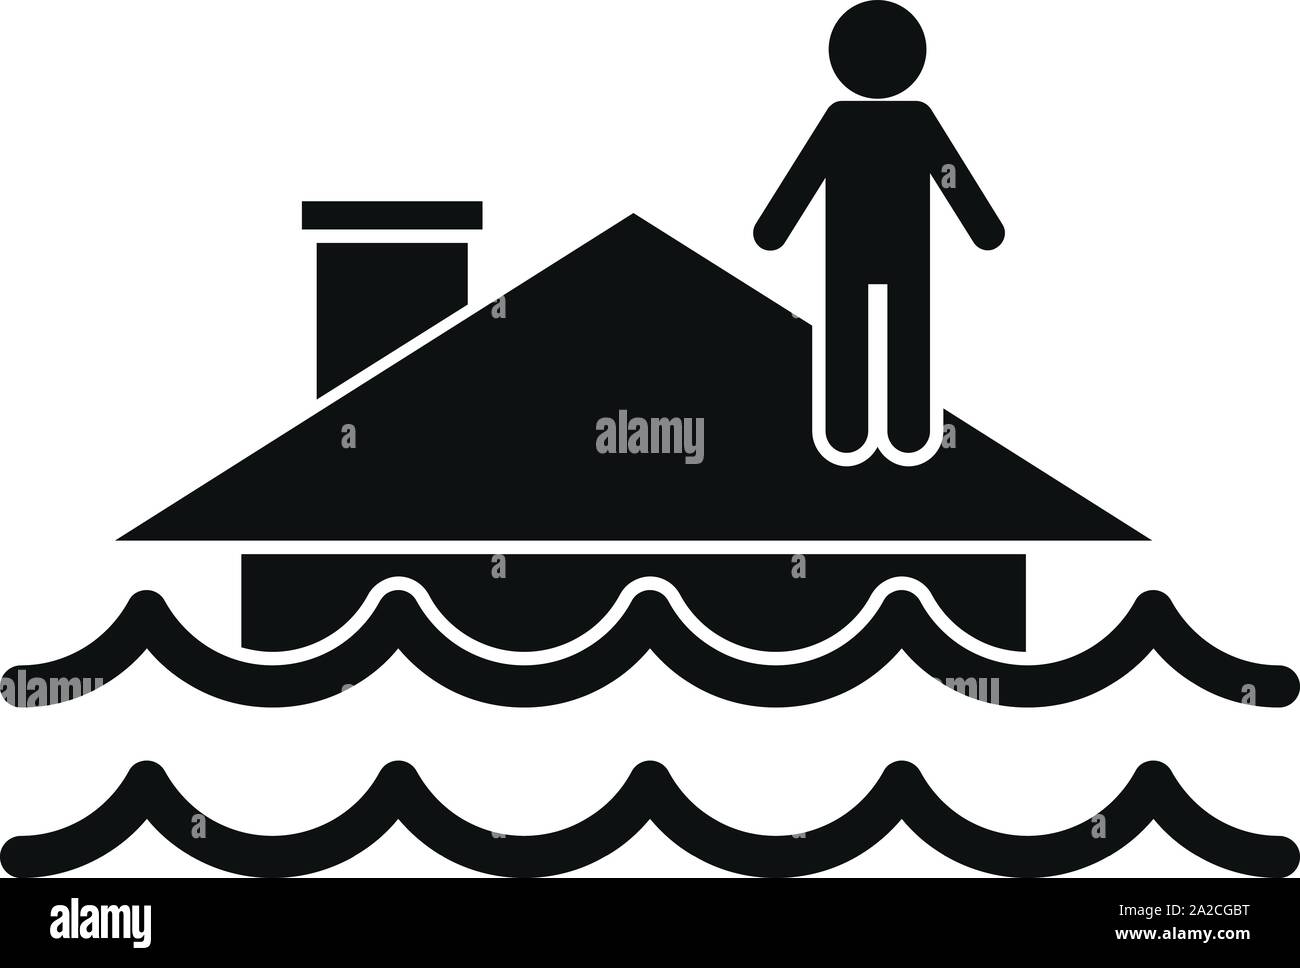 Flood roof house icon. Simple illustration of flood roof house vector icon for web design isolated on white background Stock Vector